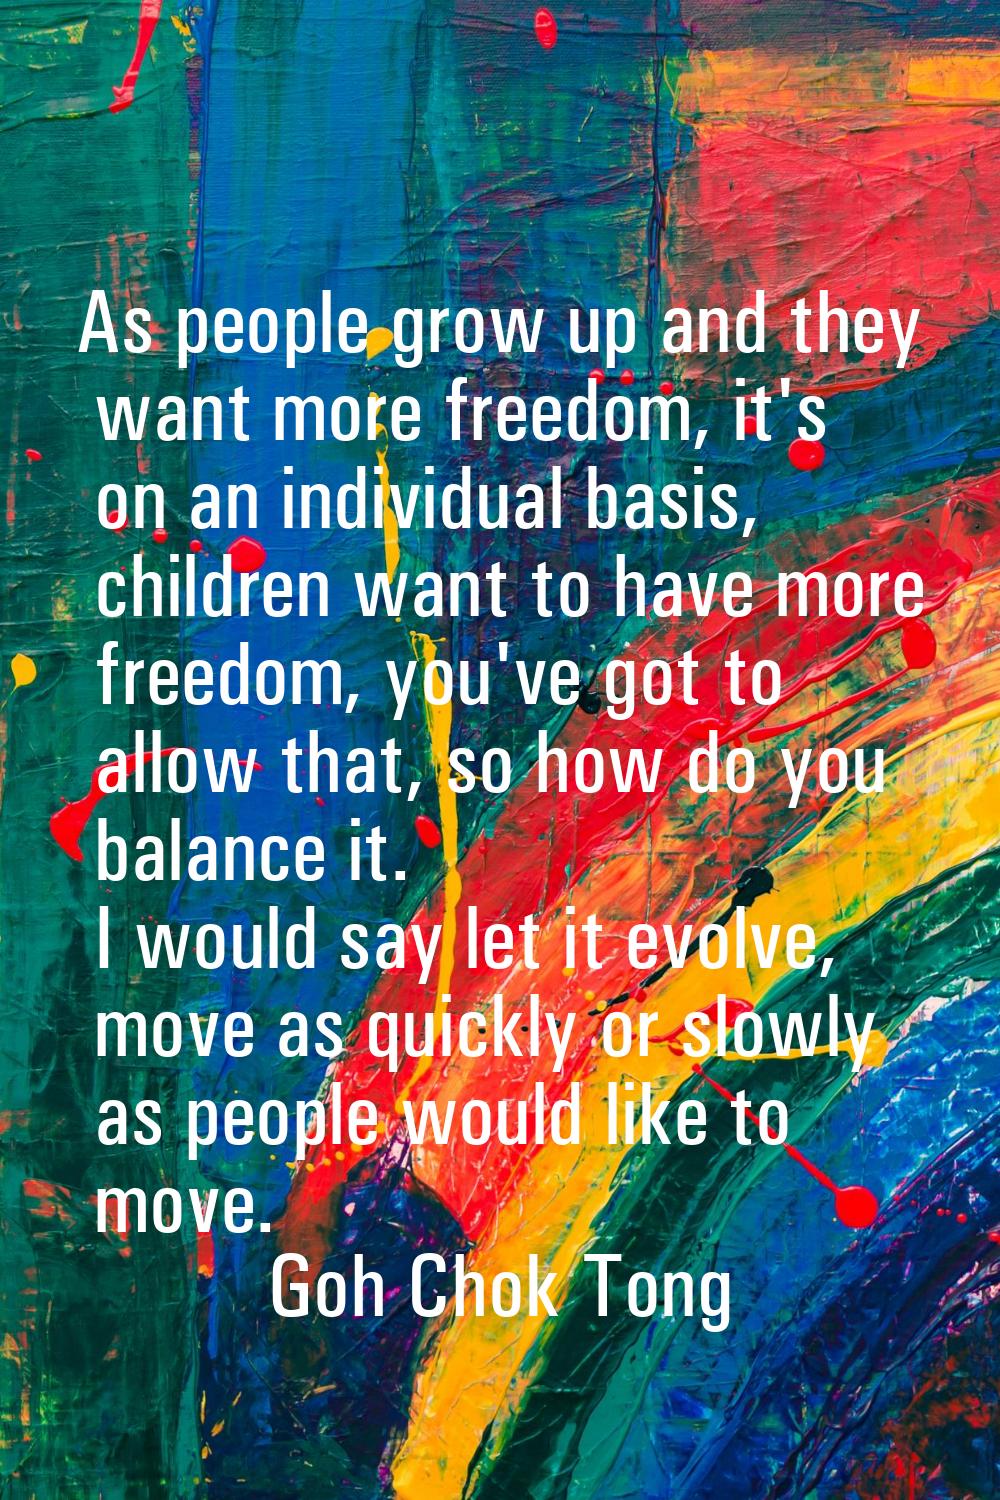 As people grow up and they want more freedom, it's on an individual basis, children want to have mo